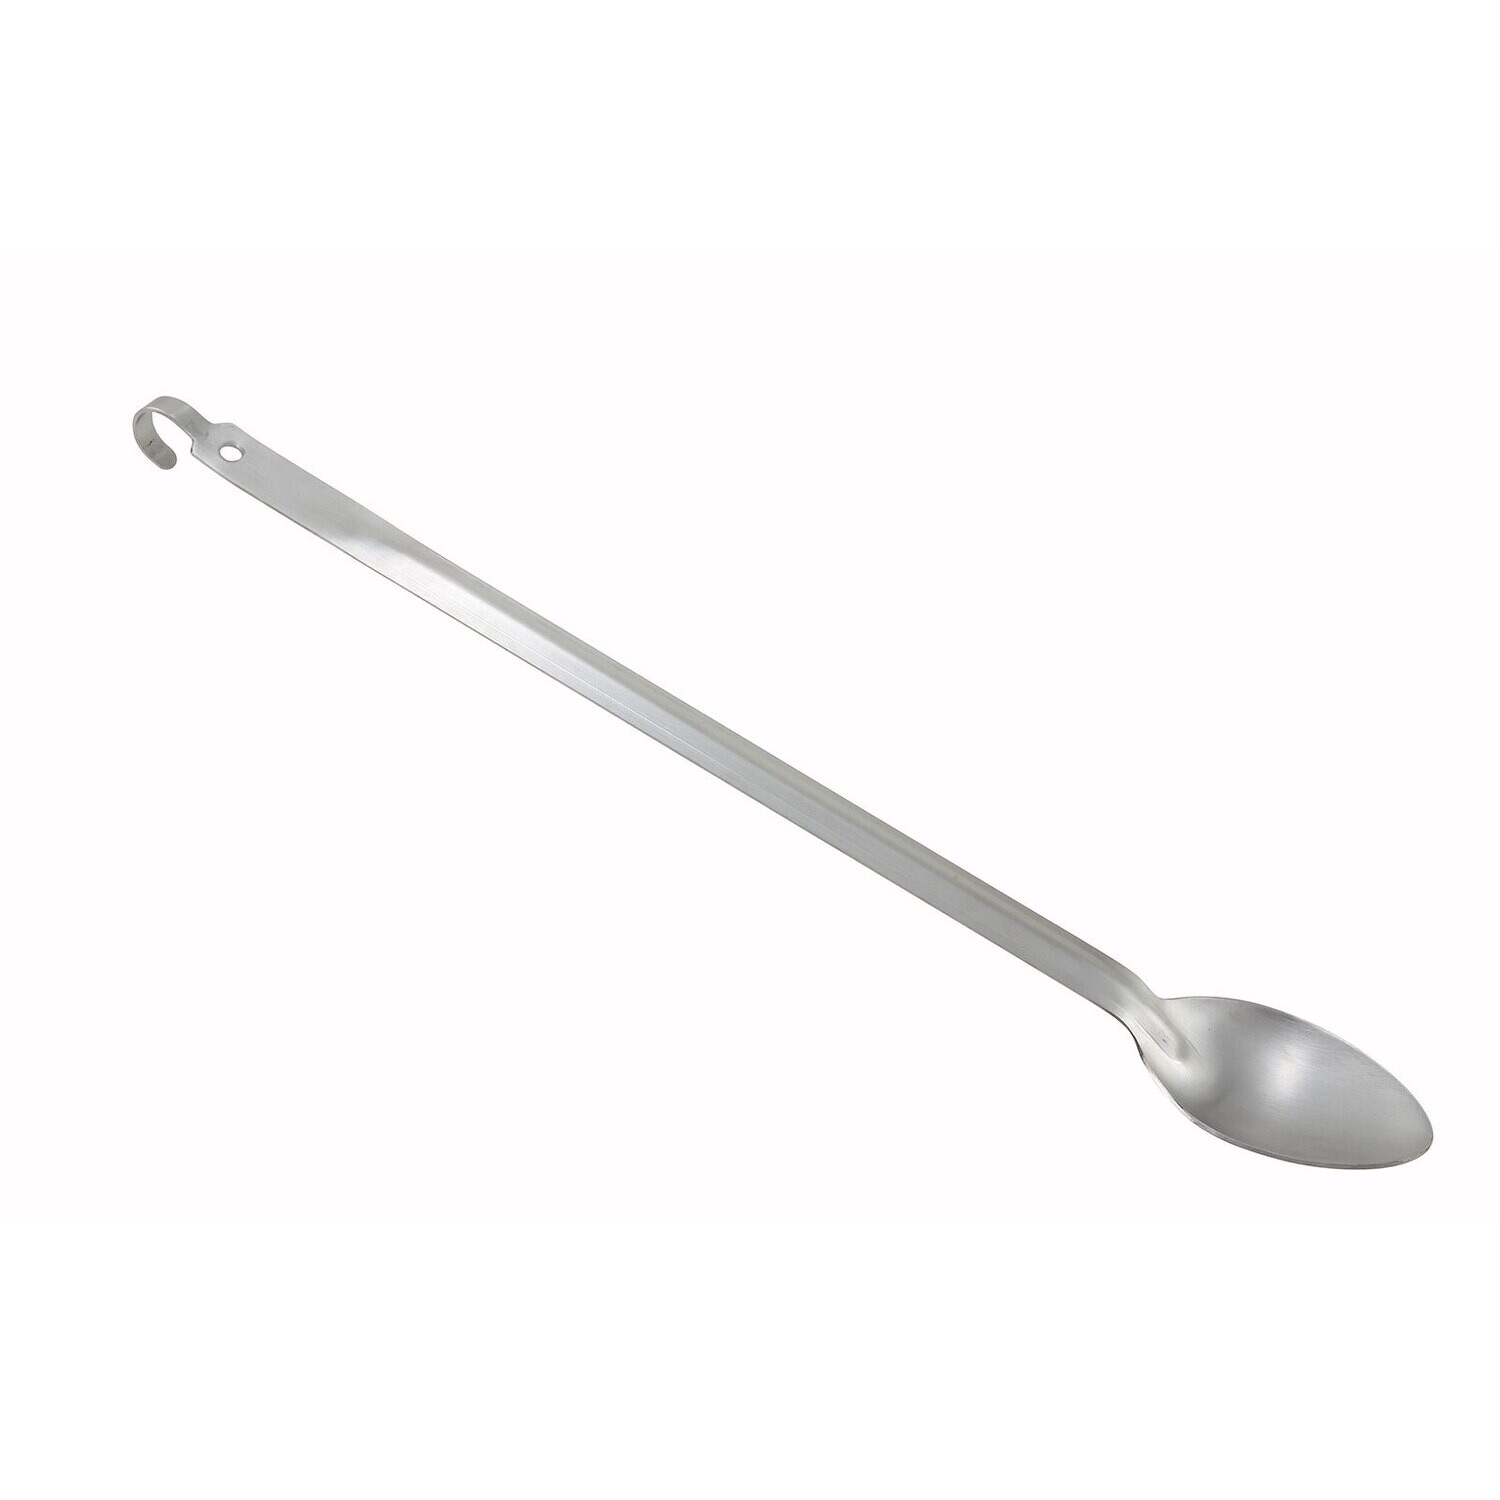 Winco BHKS-21 Solid Basting Spoon with Hang Hook, Stainless Steel, Heavy Duty, 2mm Thick, 21"